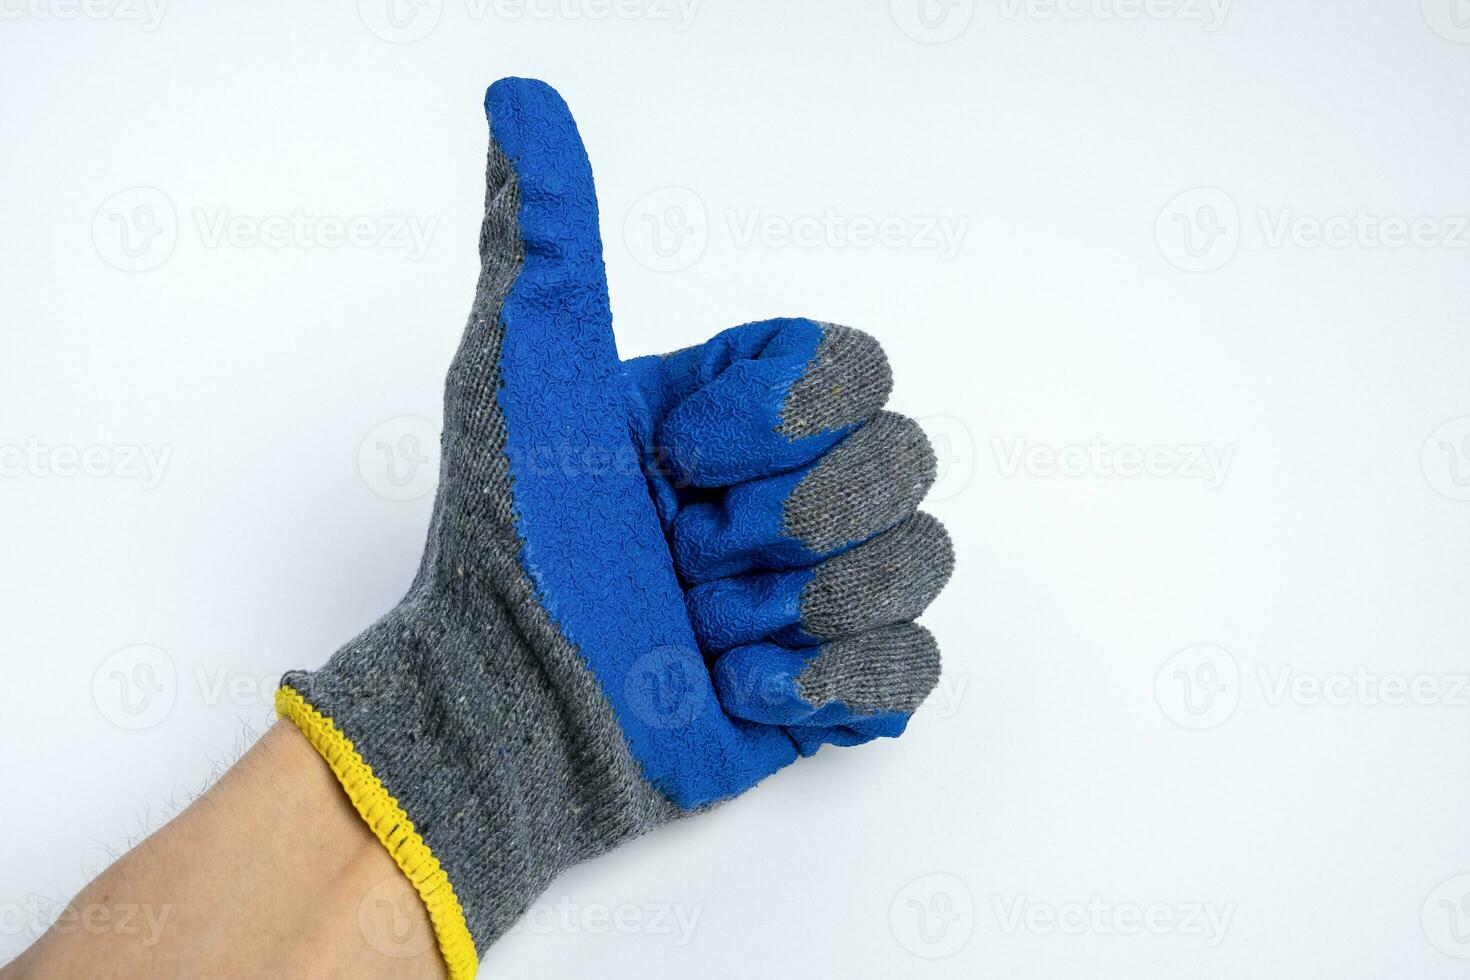 https://static.vecteezy.com/system/resources/previews/023/552/554/non_2x/a-man-s-hand-in-blue-rubberized-work-gloves-shows-a-thumbs-up-on-a-blue-background-photo.jpg